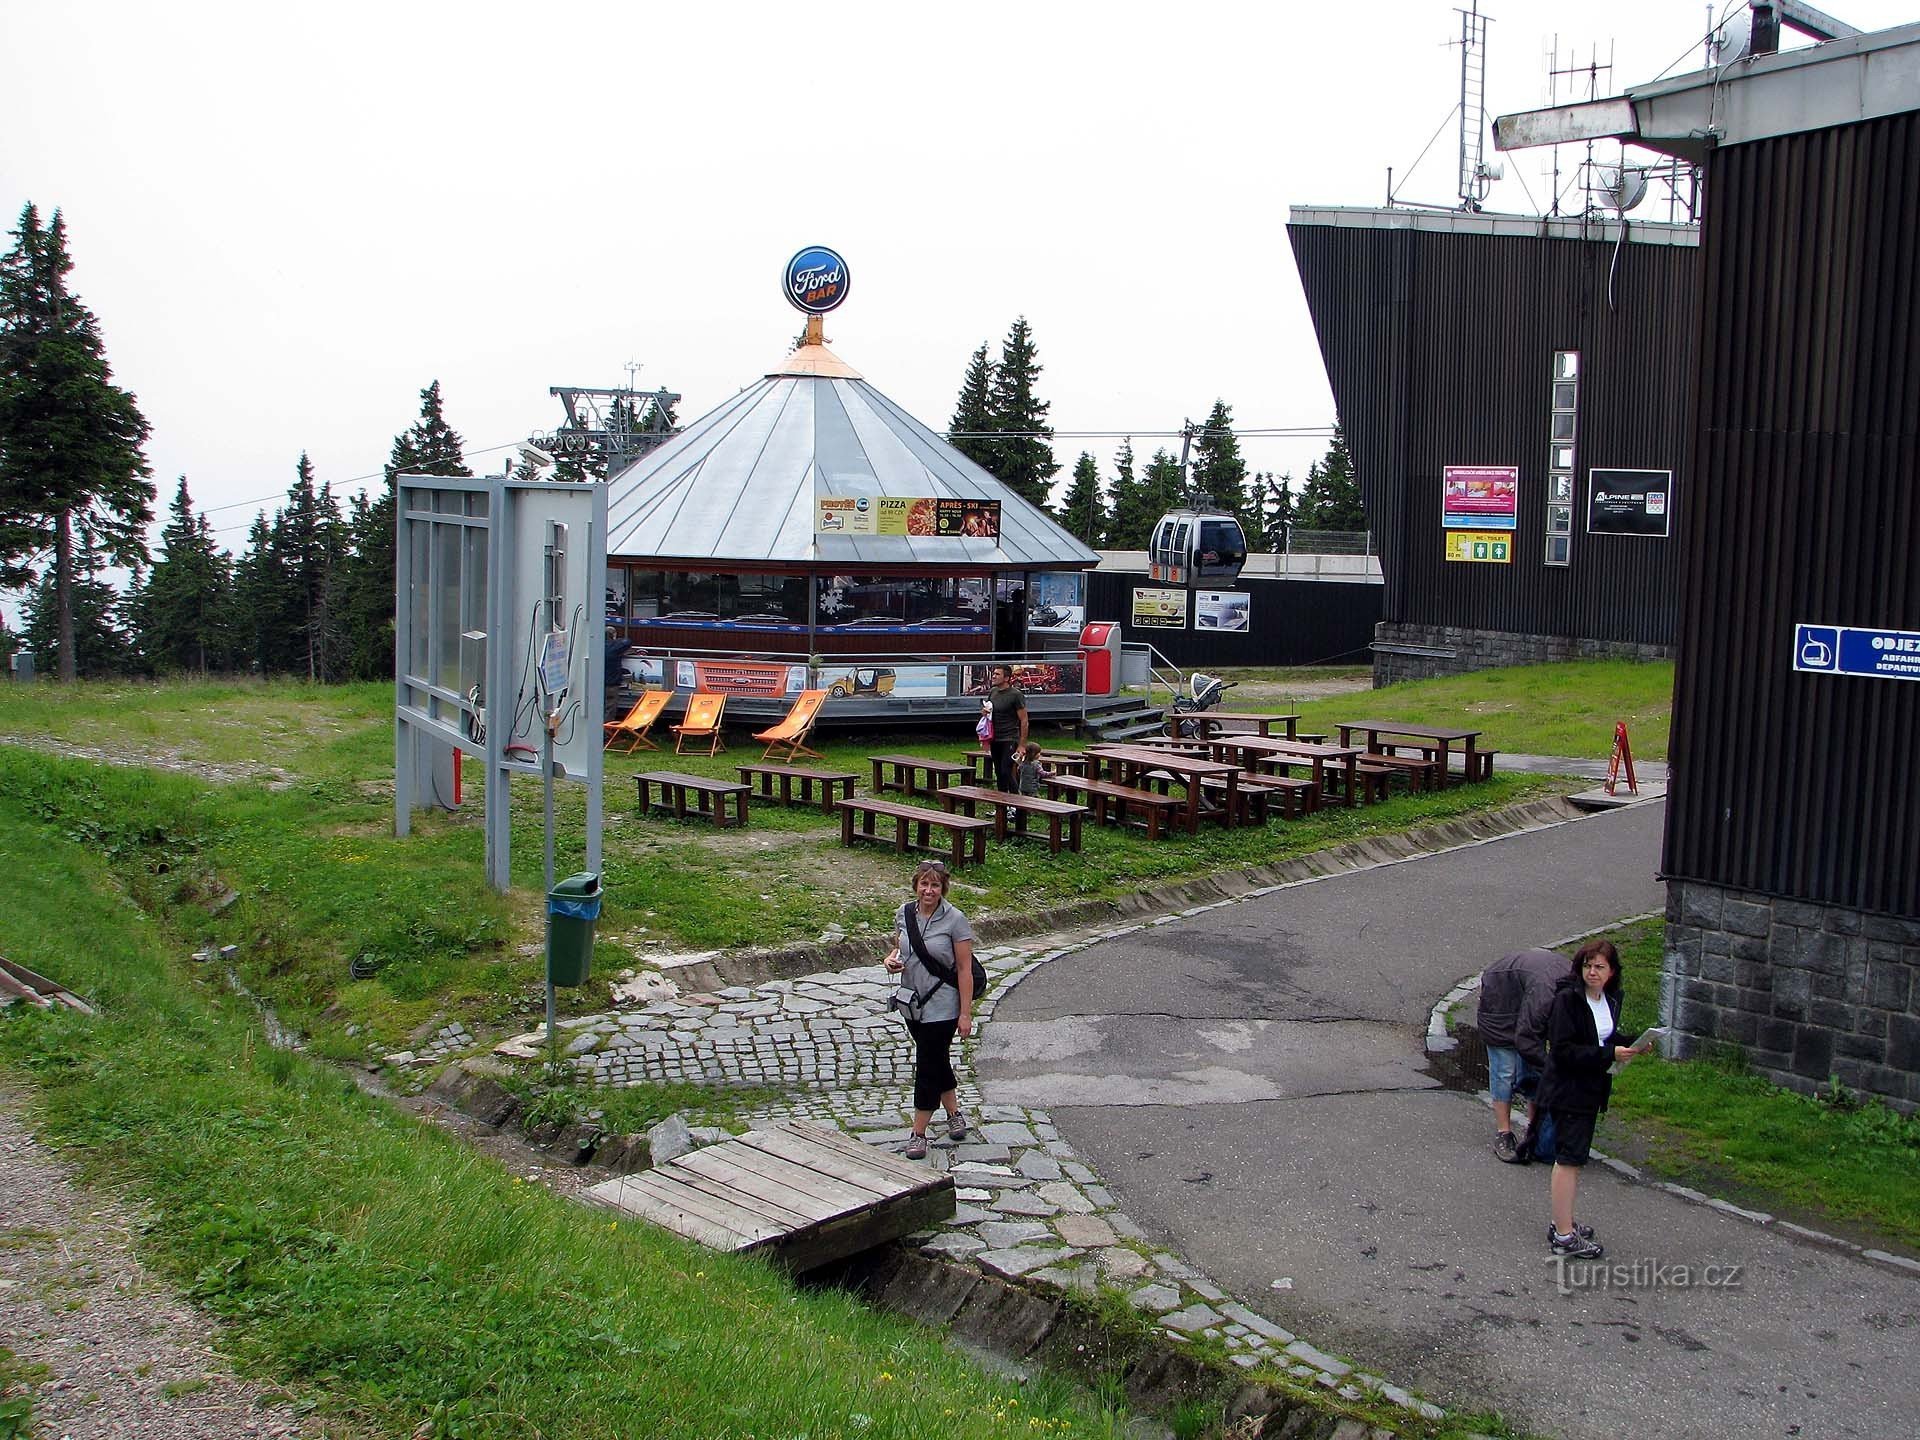 Cable car station in Montenegro